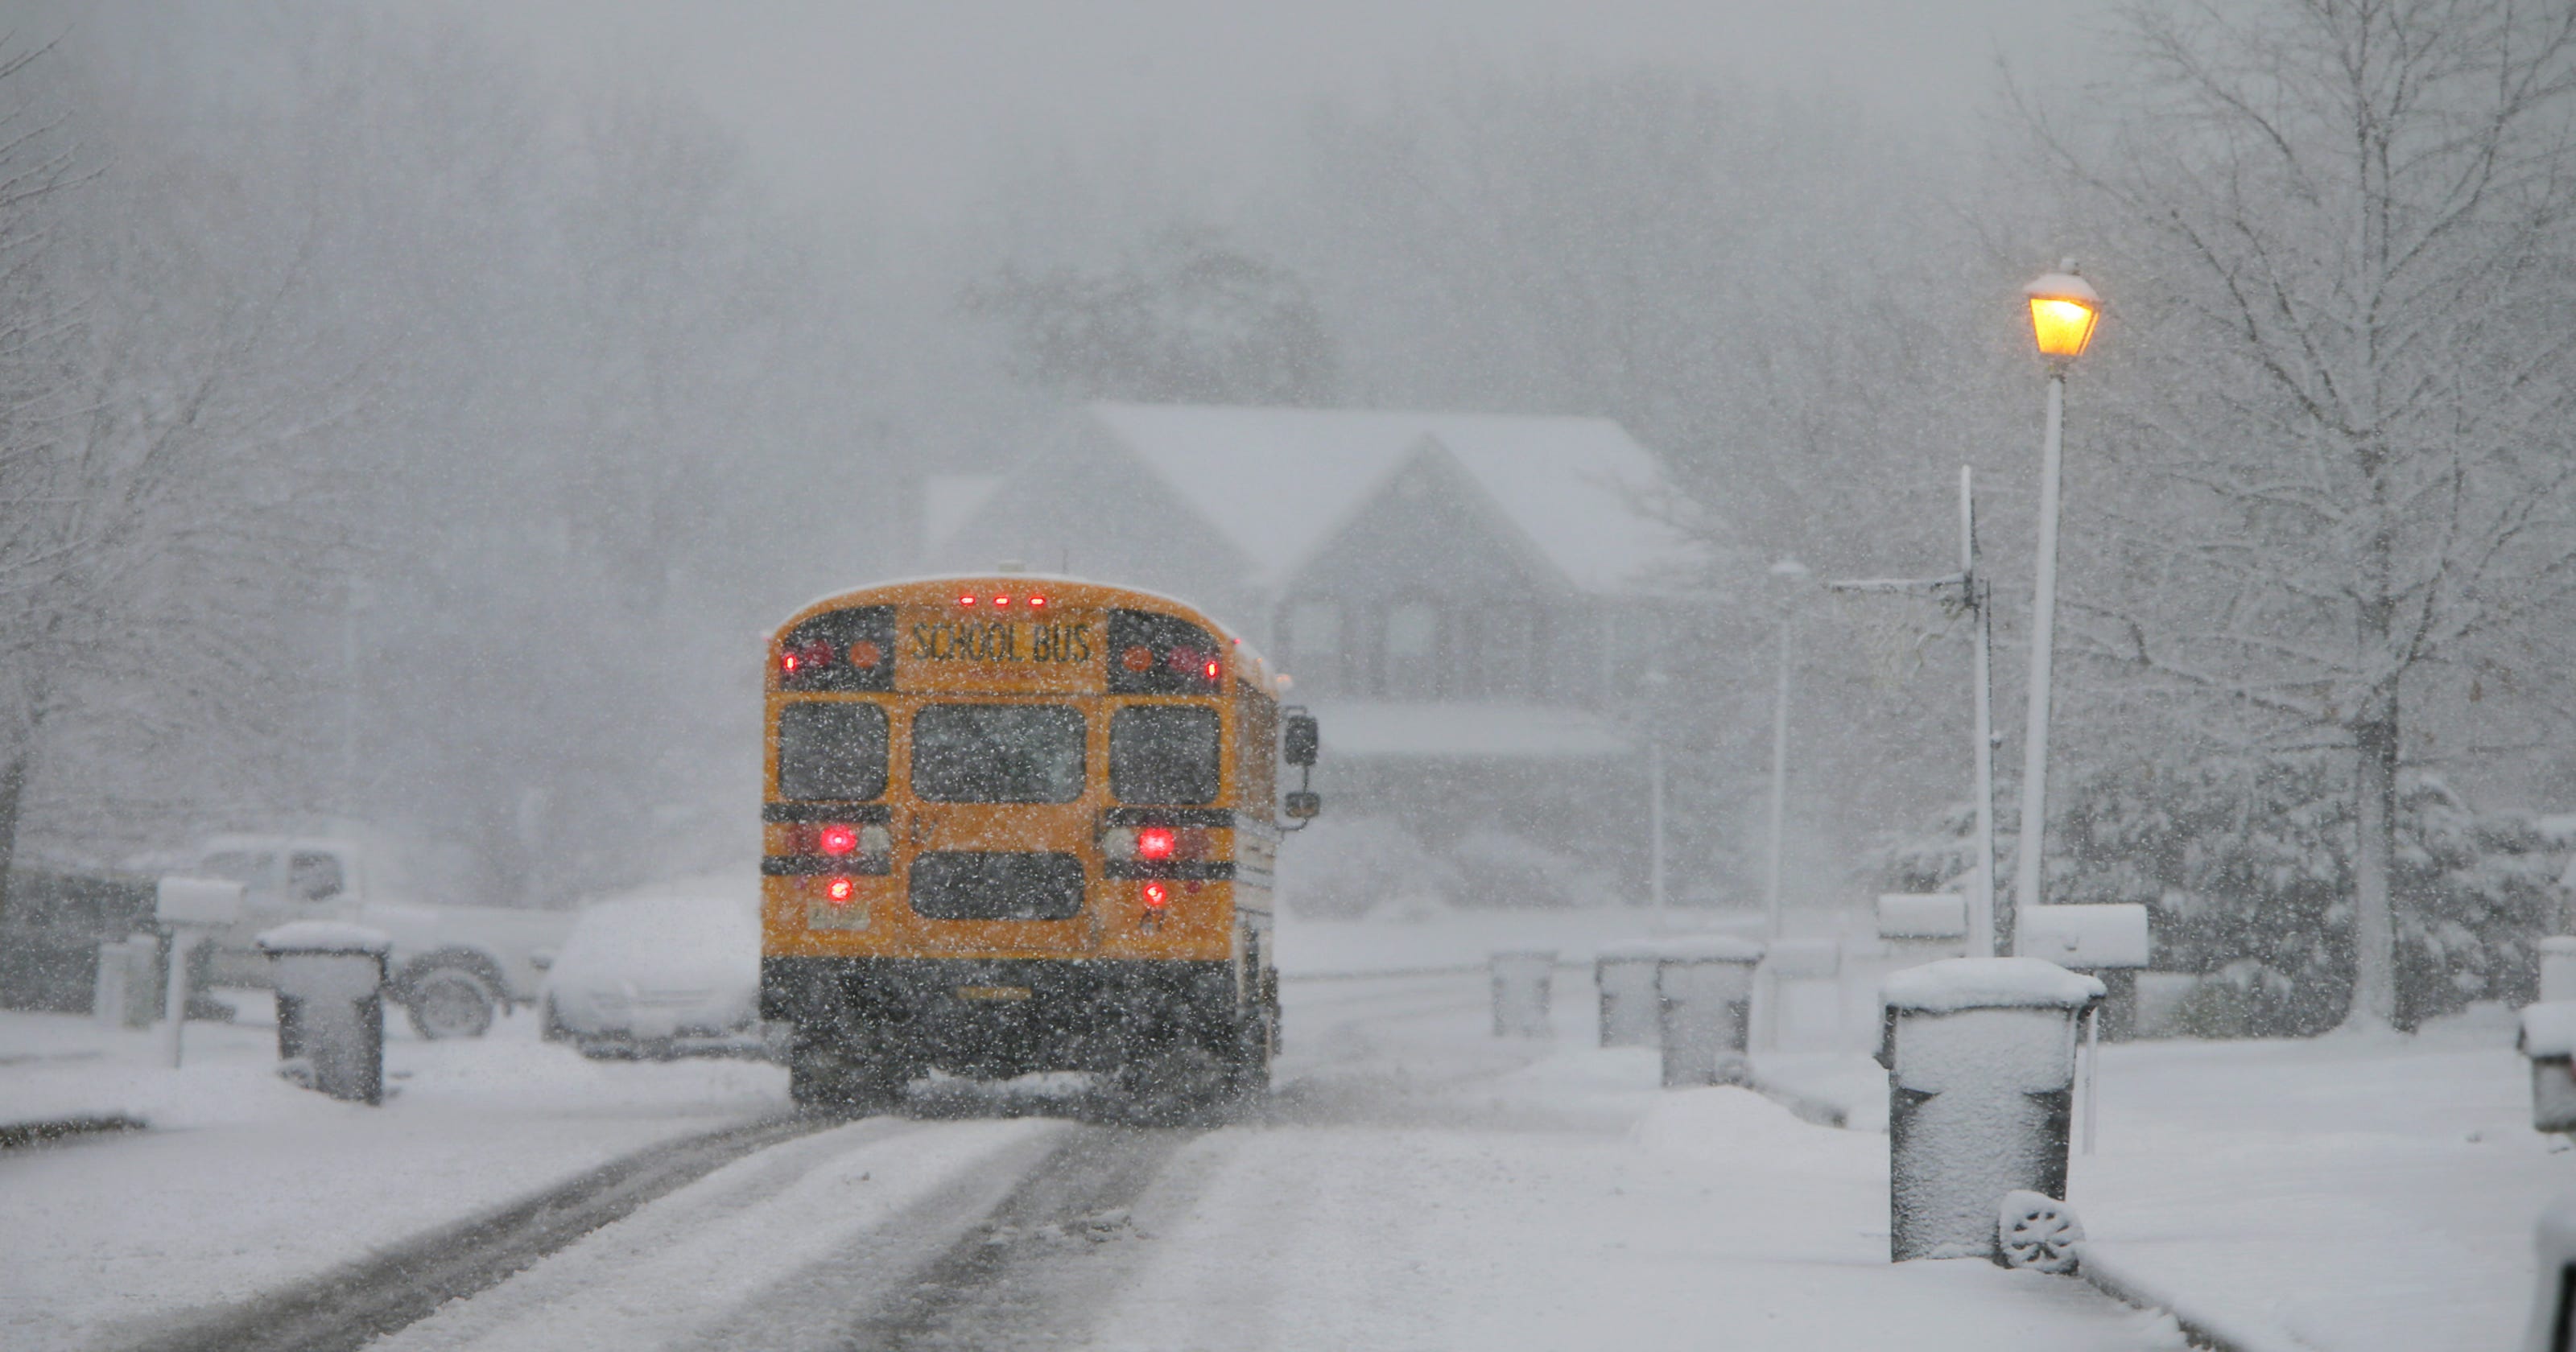 NJ Weather: All school and other closings for Wednesday, March 7, 20183200 x 1680